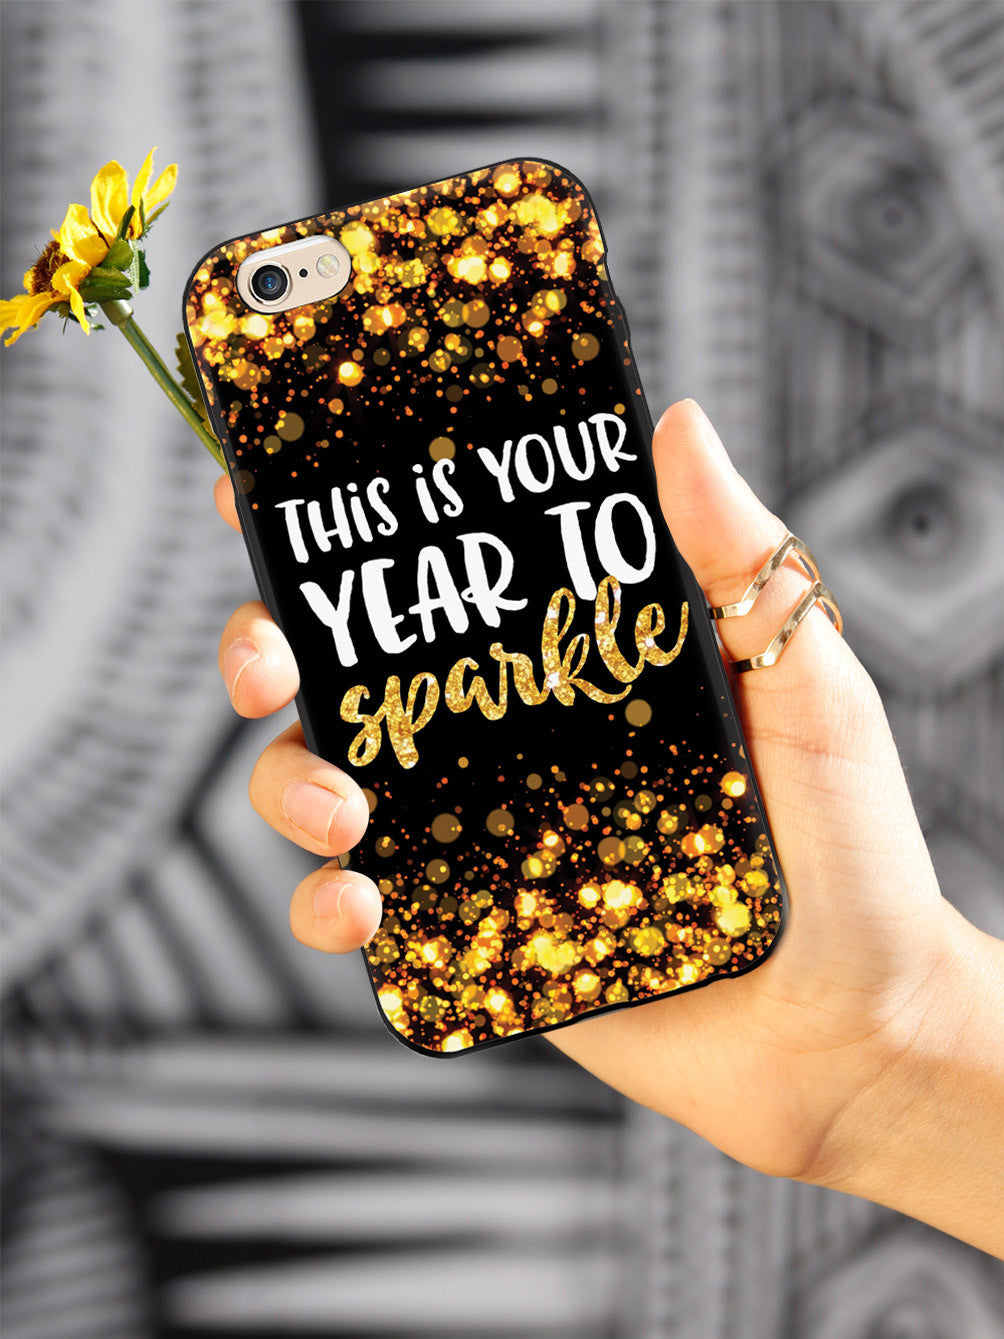 This is your Year to Sparkle - Black and Gold Case